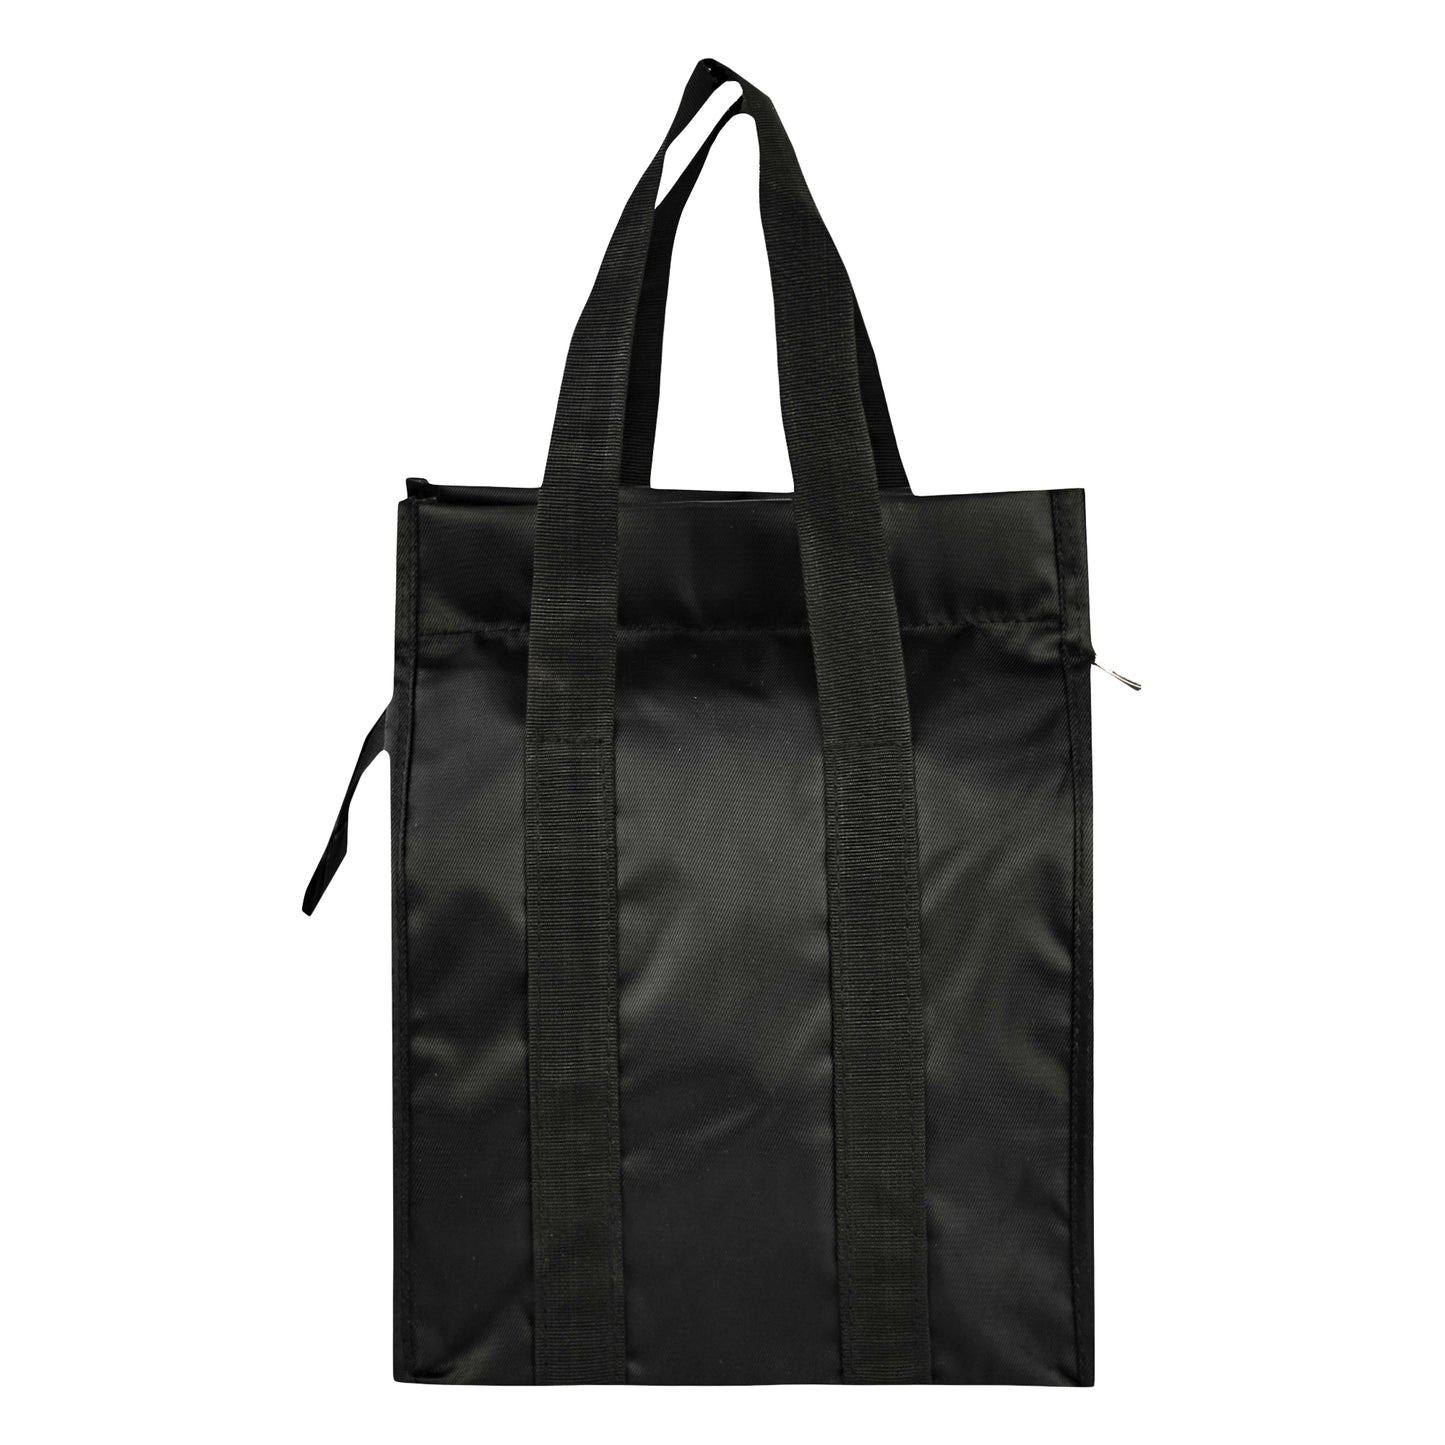 Thaili No.2 Tiffin Bag 11in x 8in x 6in TB-401 - Extra Small